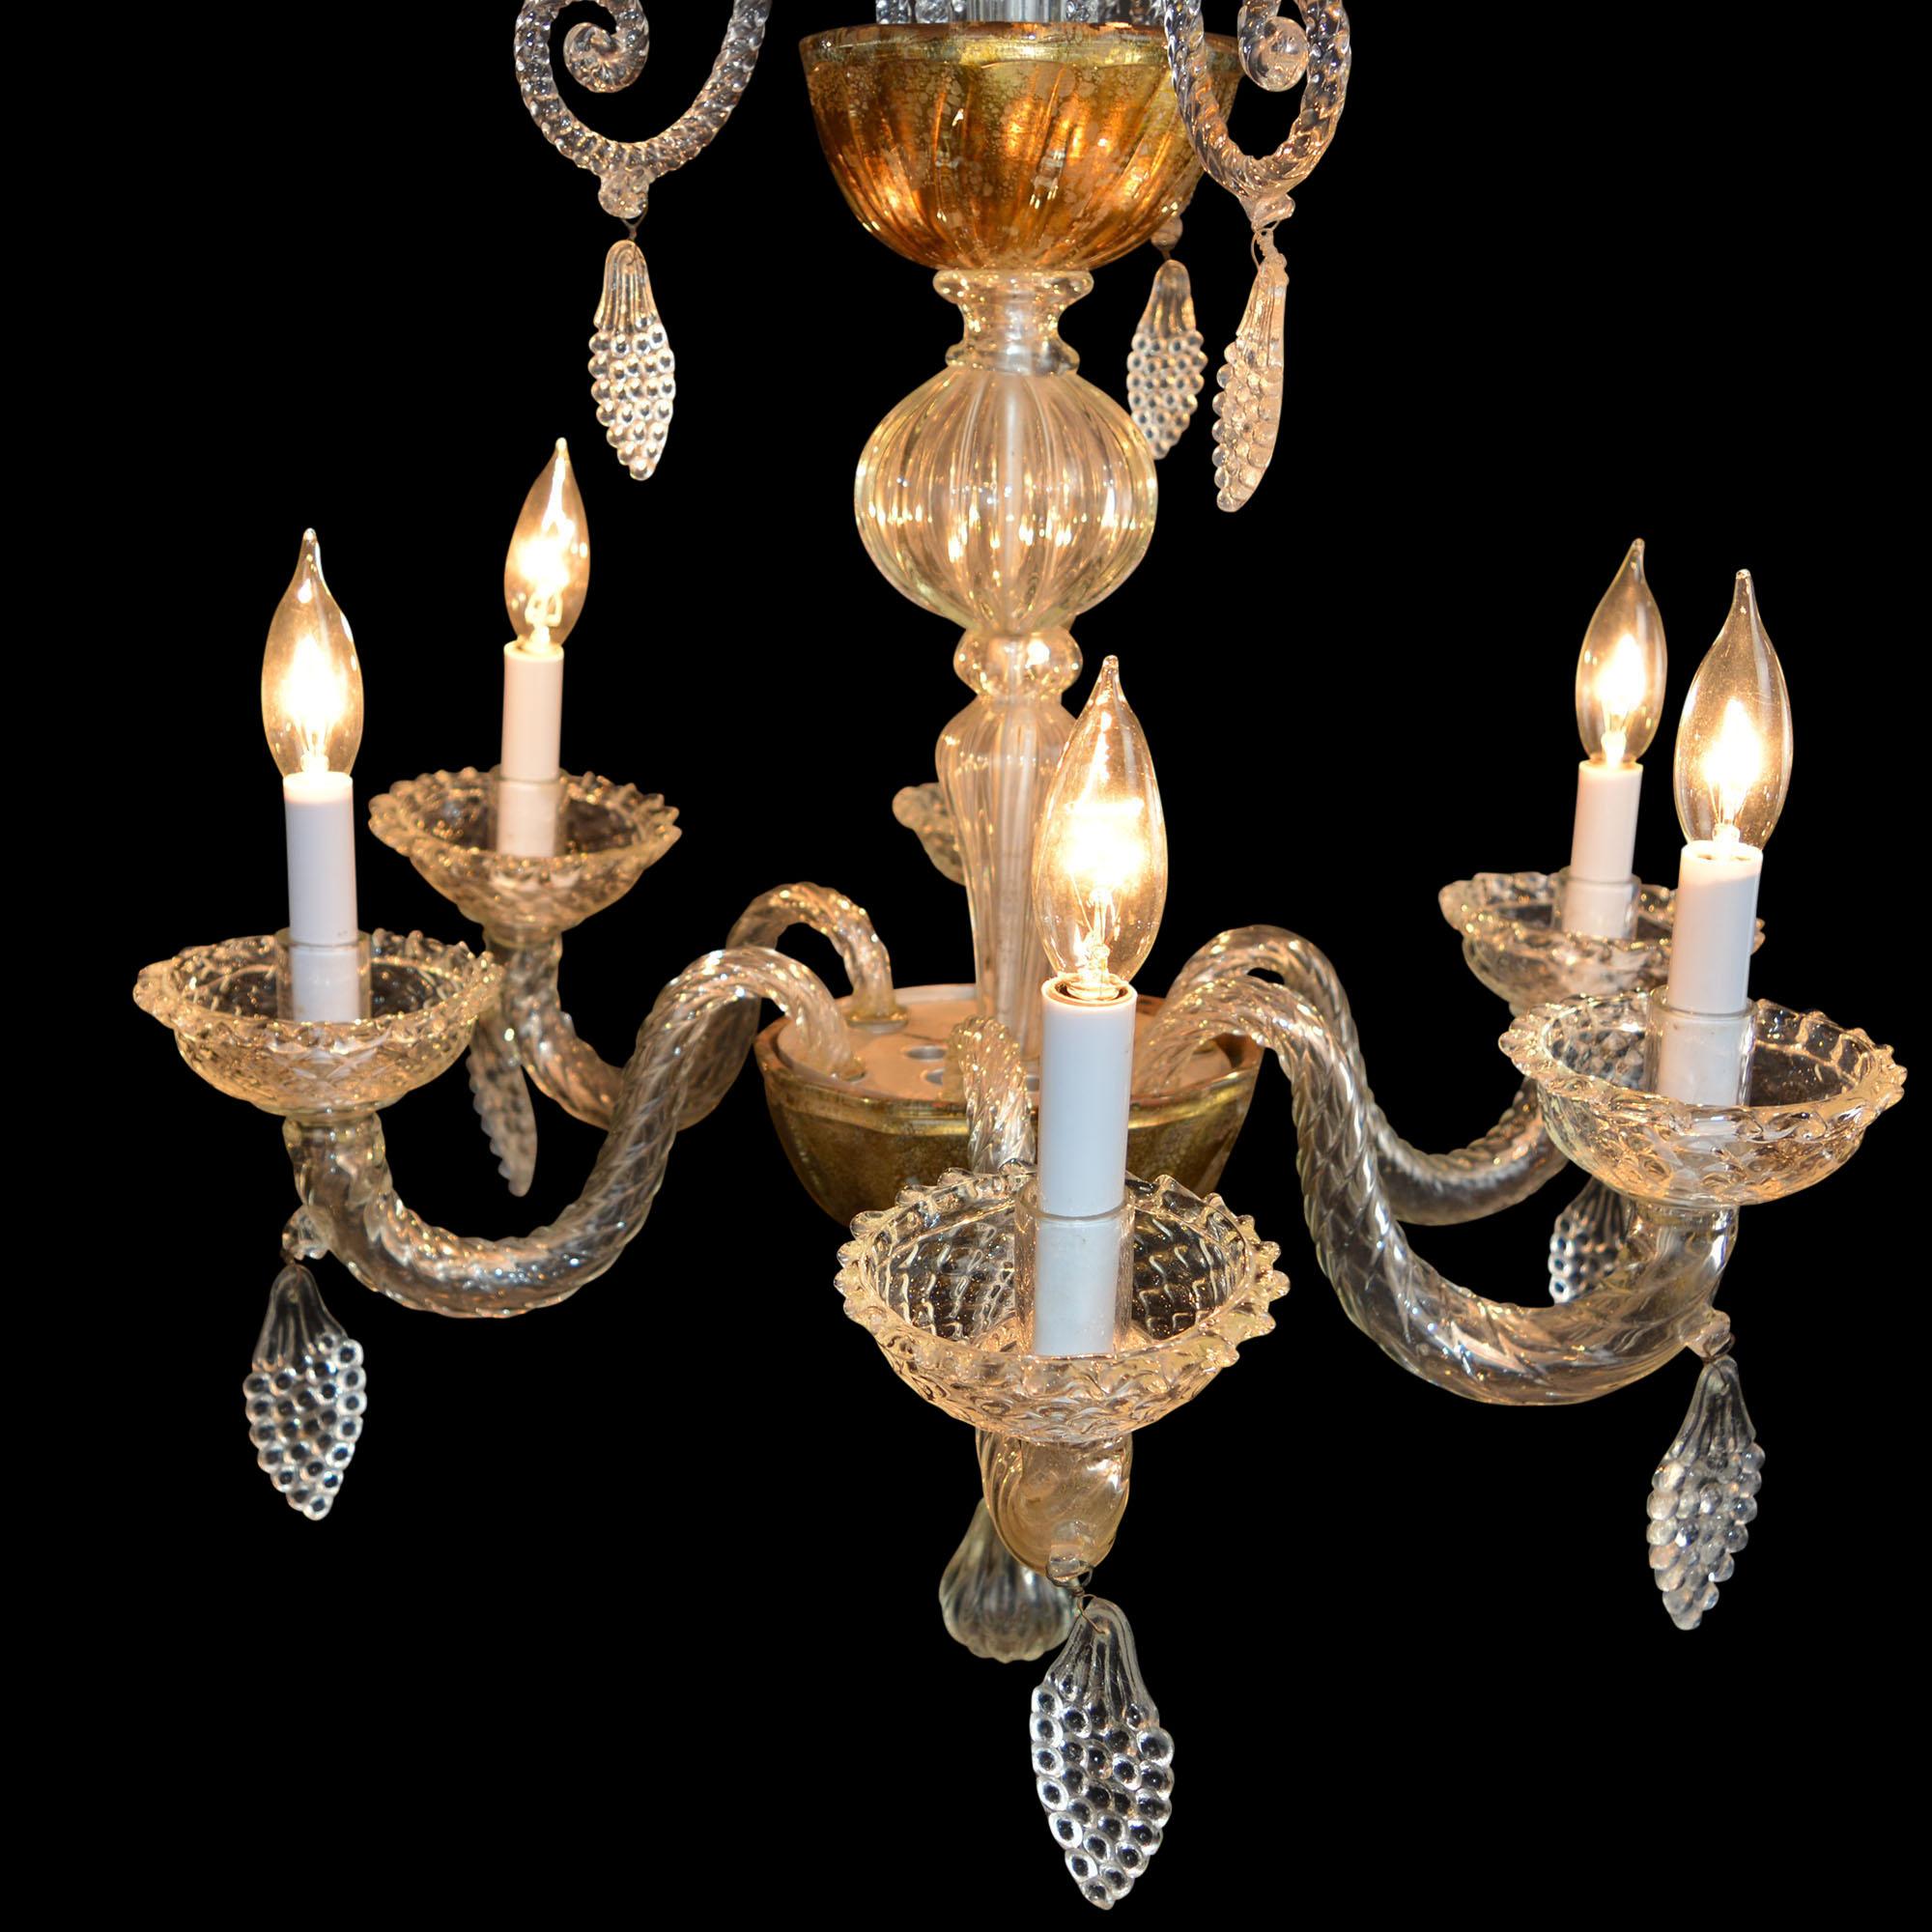 Beautiful antique chandelier originally fitted for gas but was later converted to electricity features 6 lighted arms and an additional 6 decorative arms. In 2019, it was converted for US electricity. It is Liege glass which known for its detailed